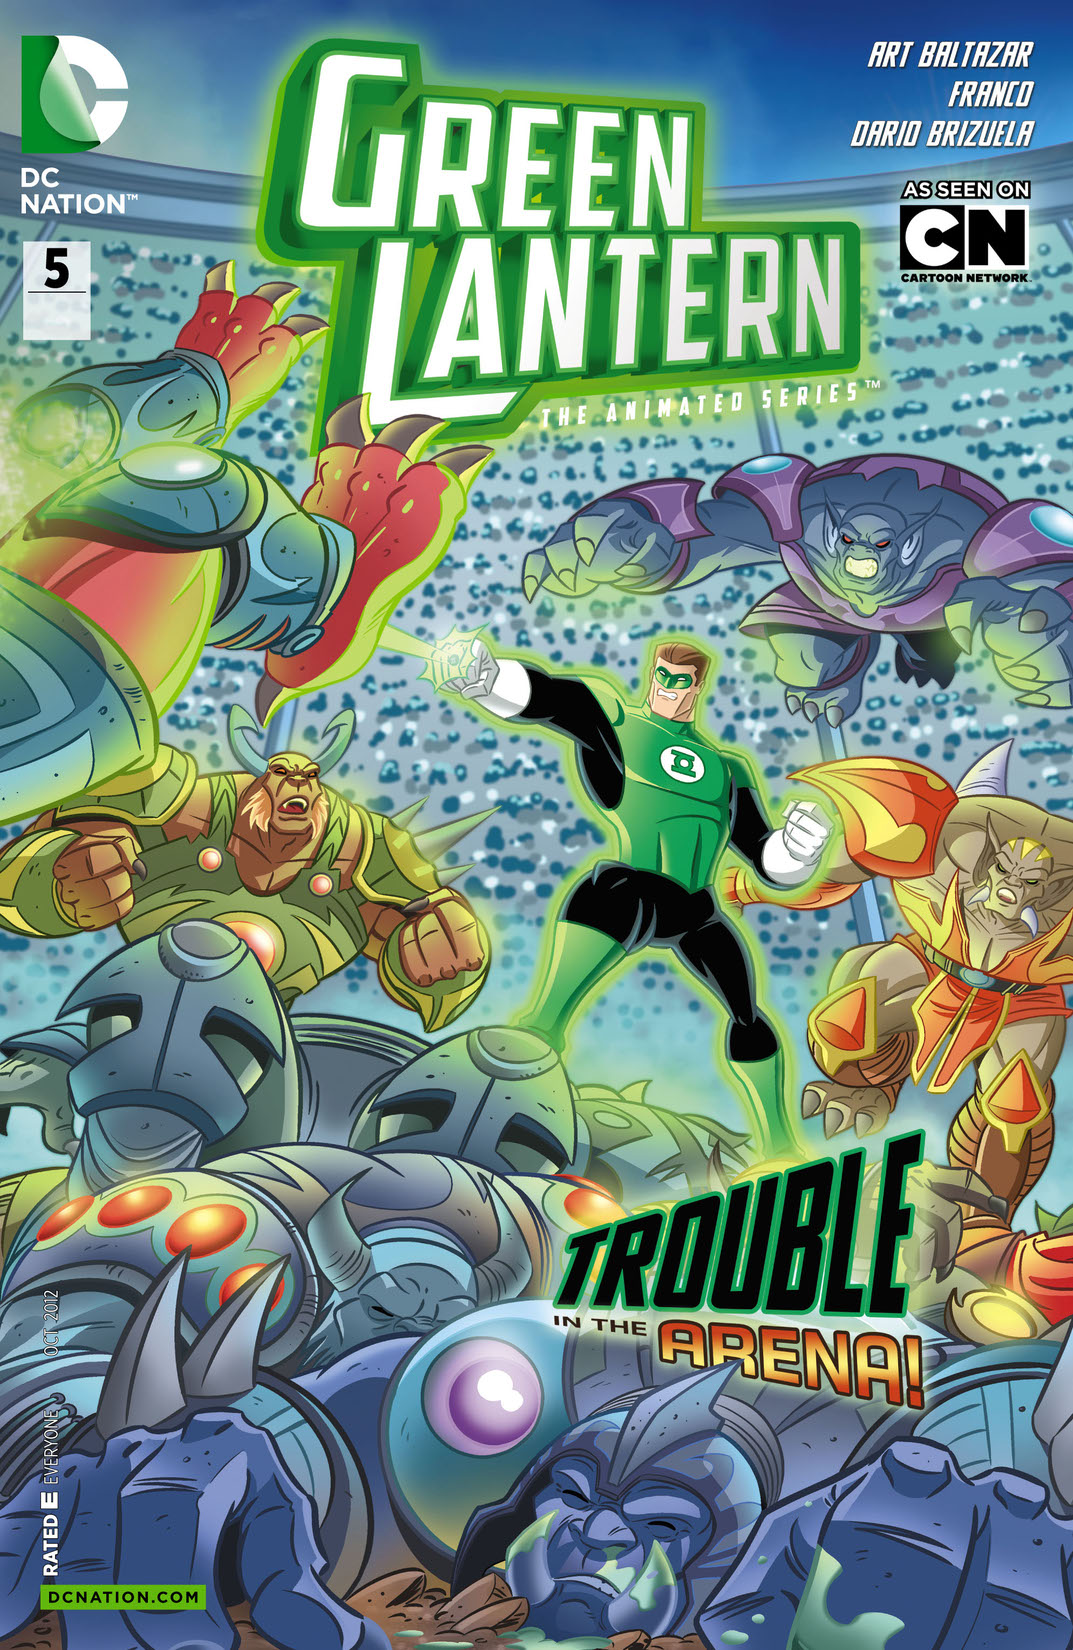 Green Lantern: The Animated Series #5 preview images